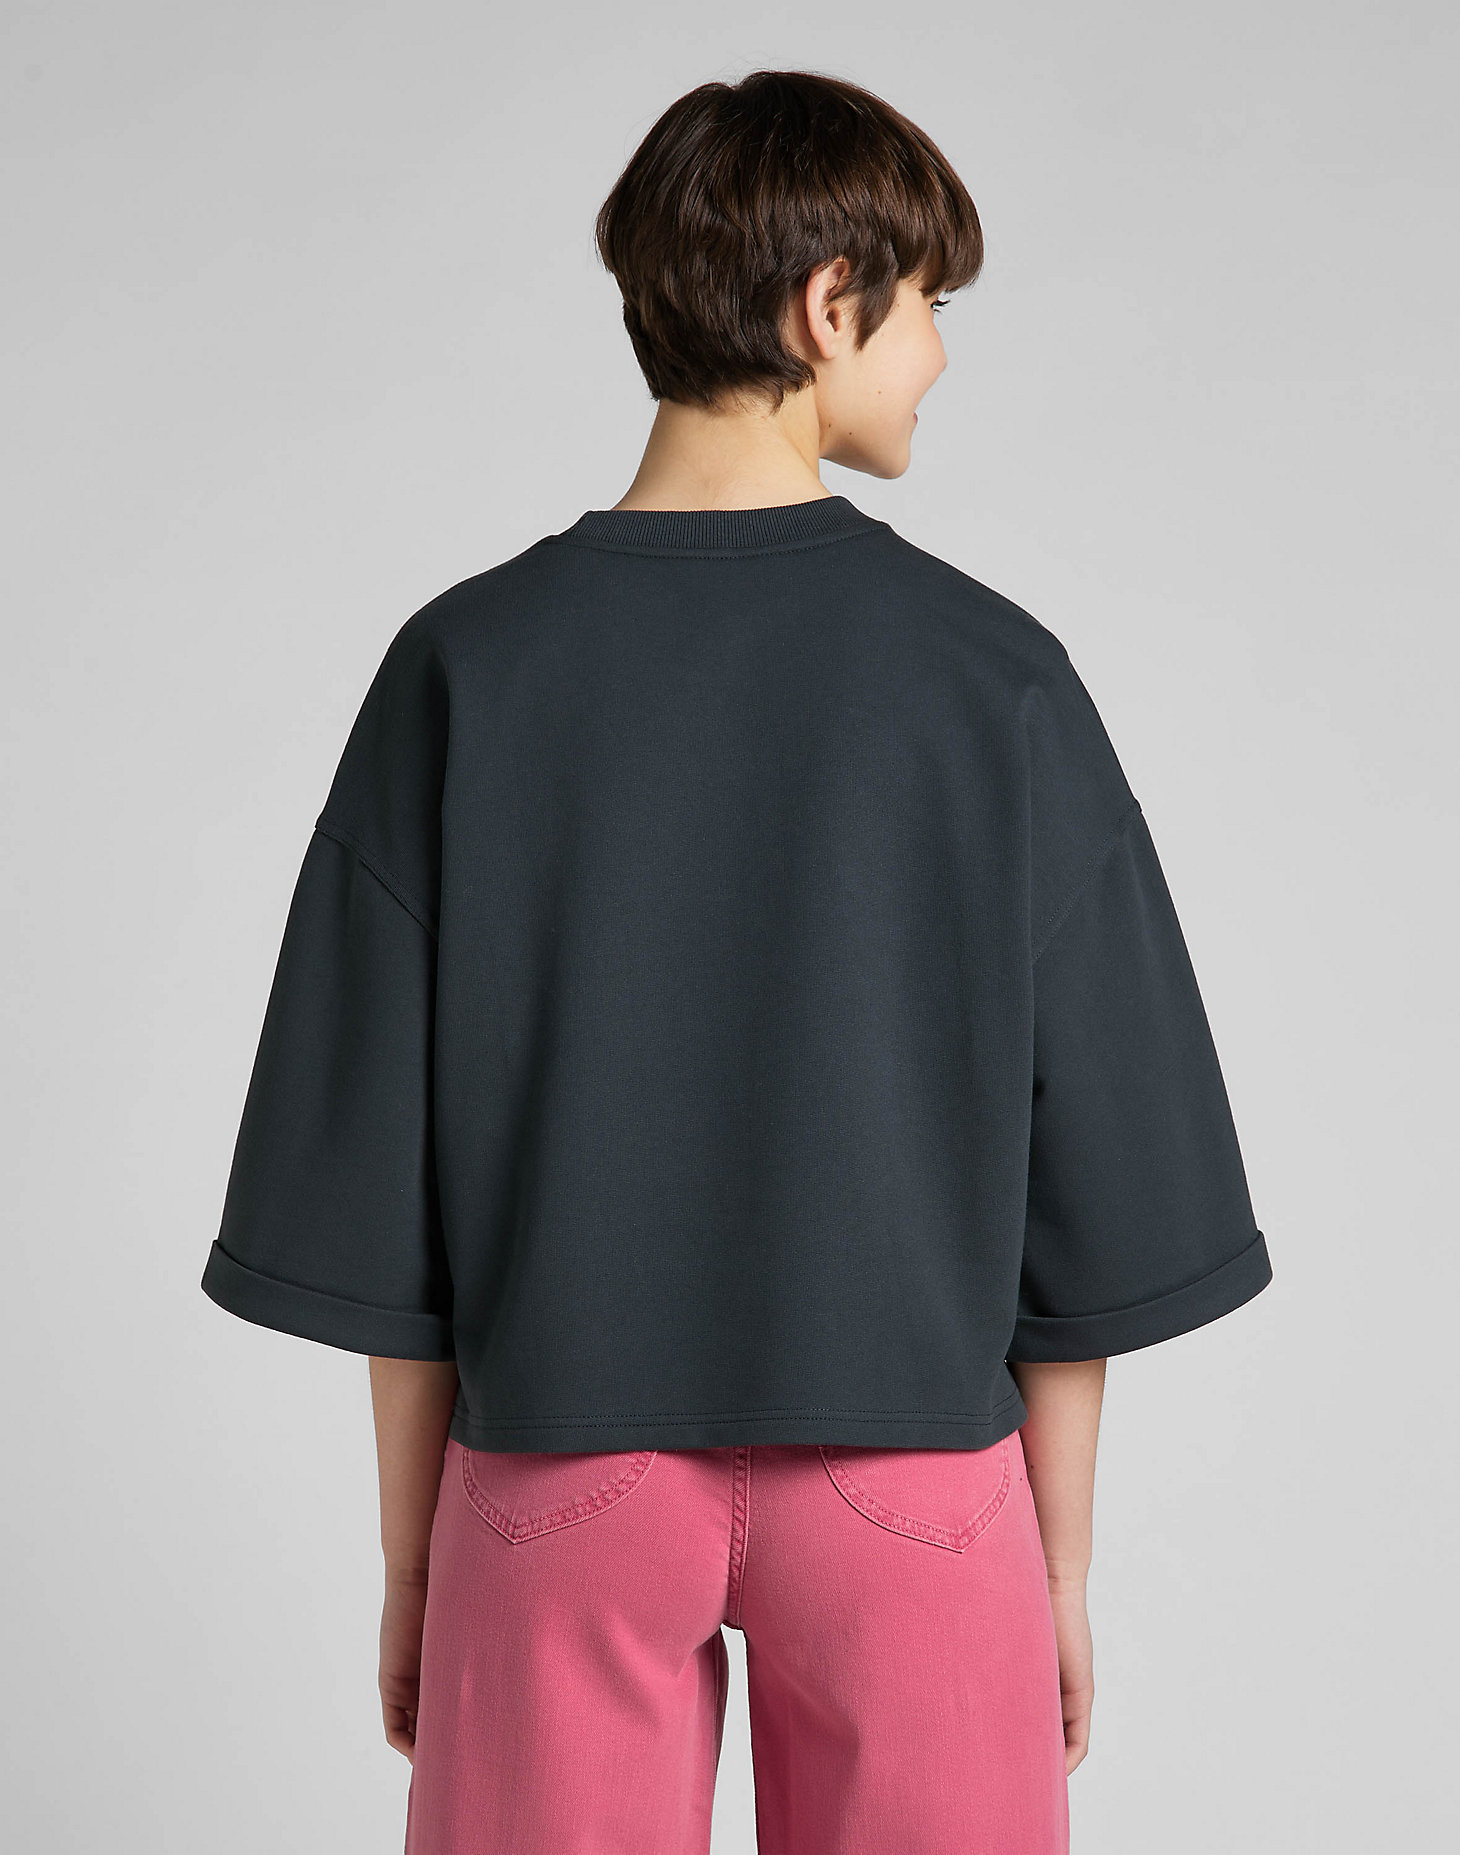 Cropped Sweatshirt in Charcoal alternative view 1